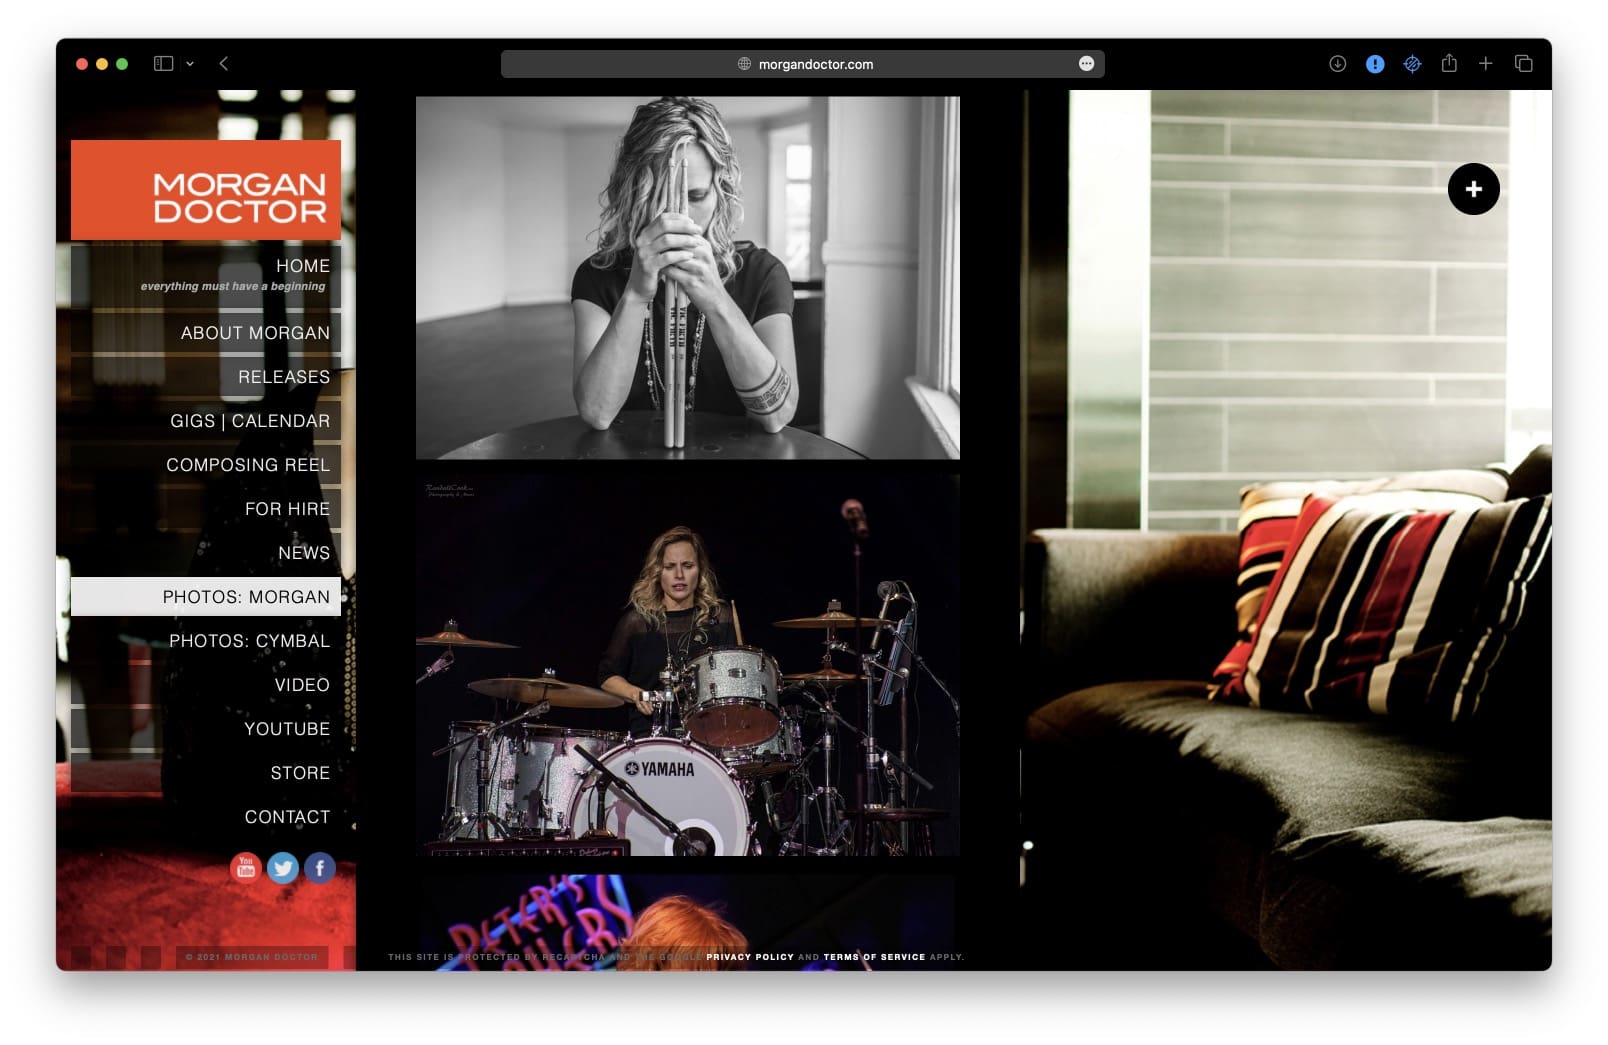 A screen shot of a website featuring musician Morgan Doctor sitting on a couch.